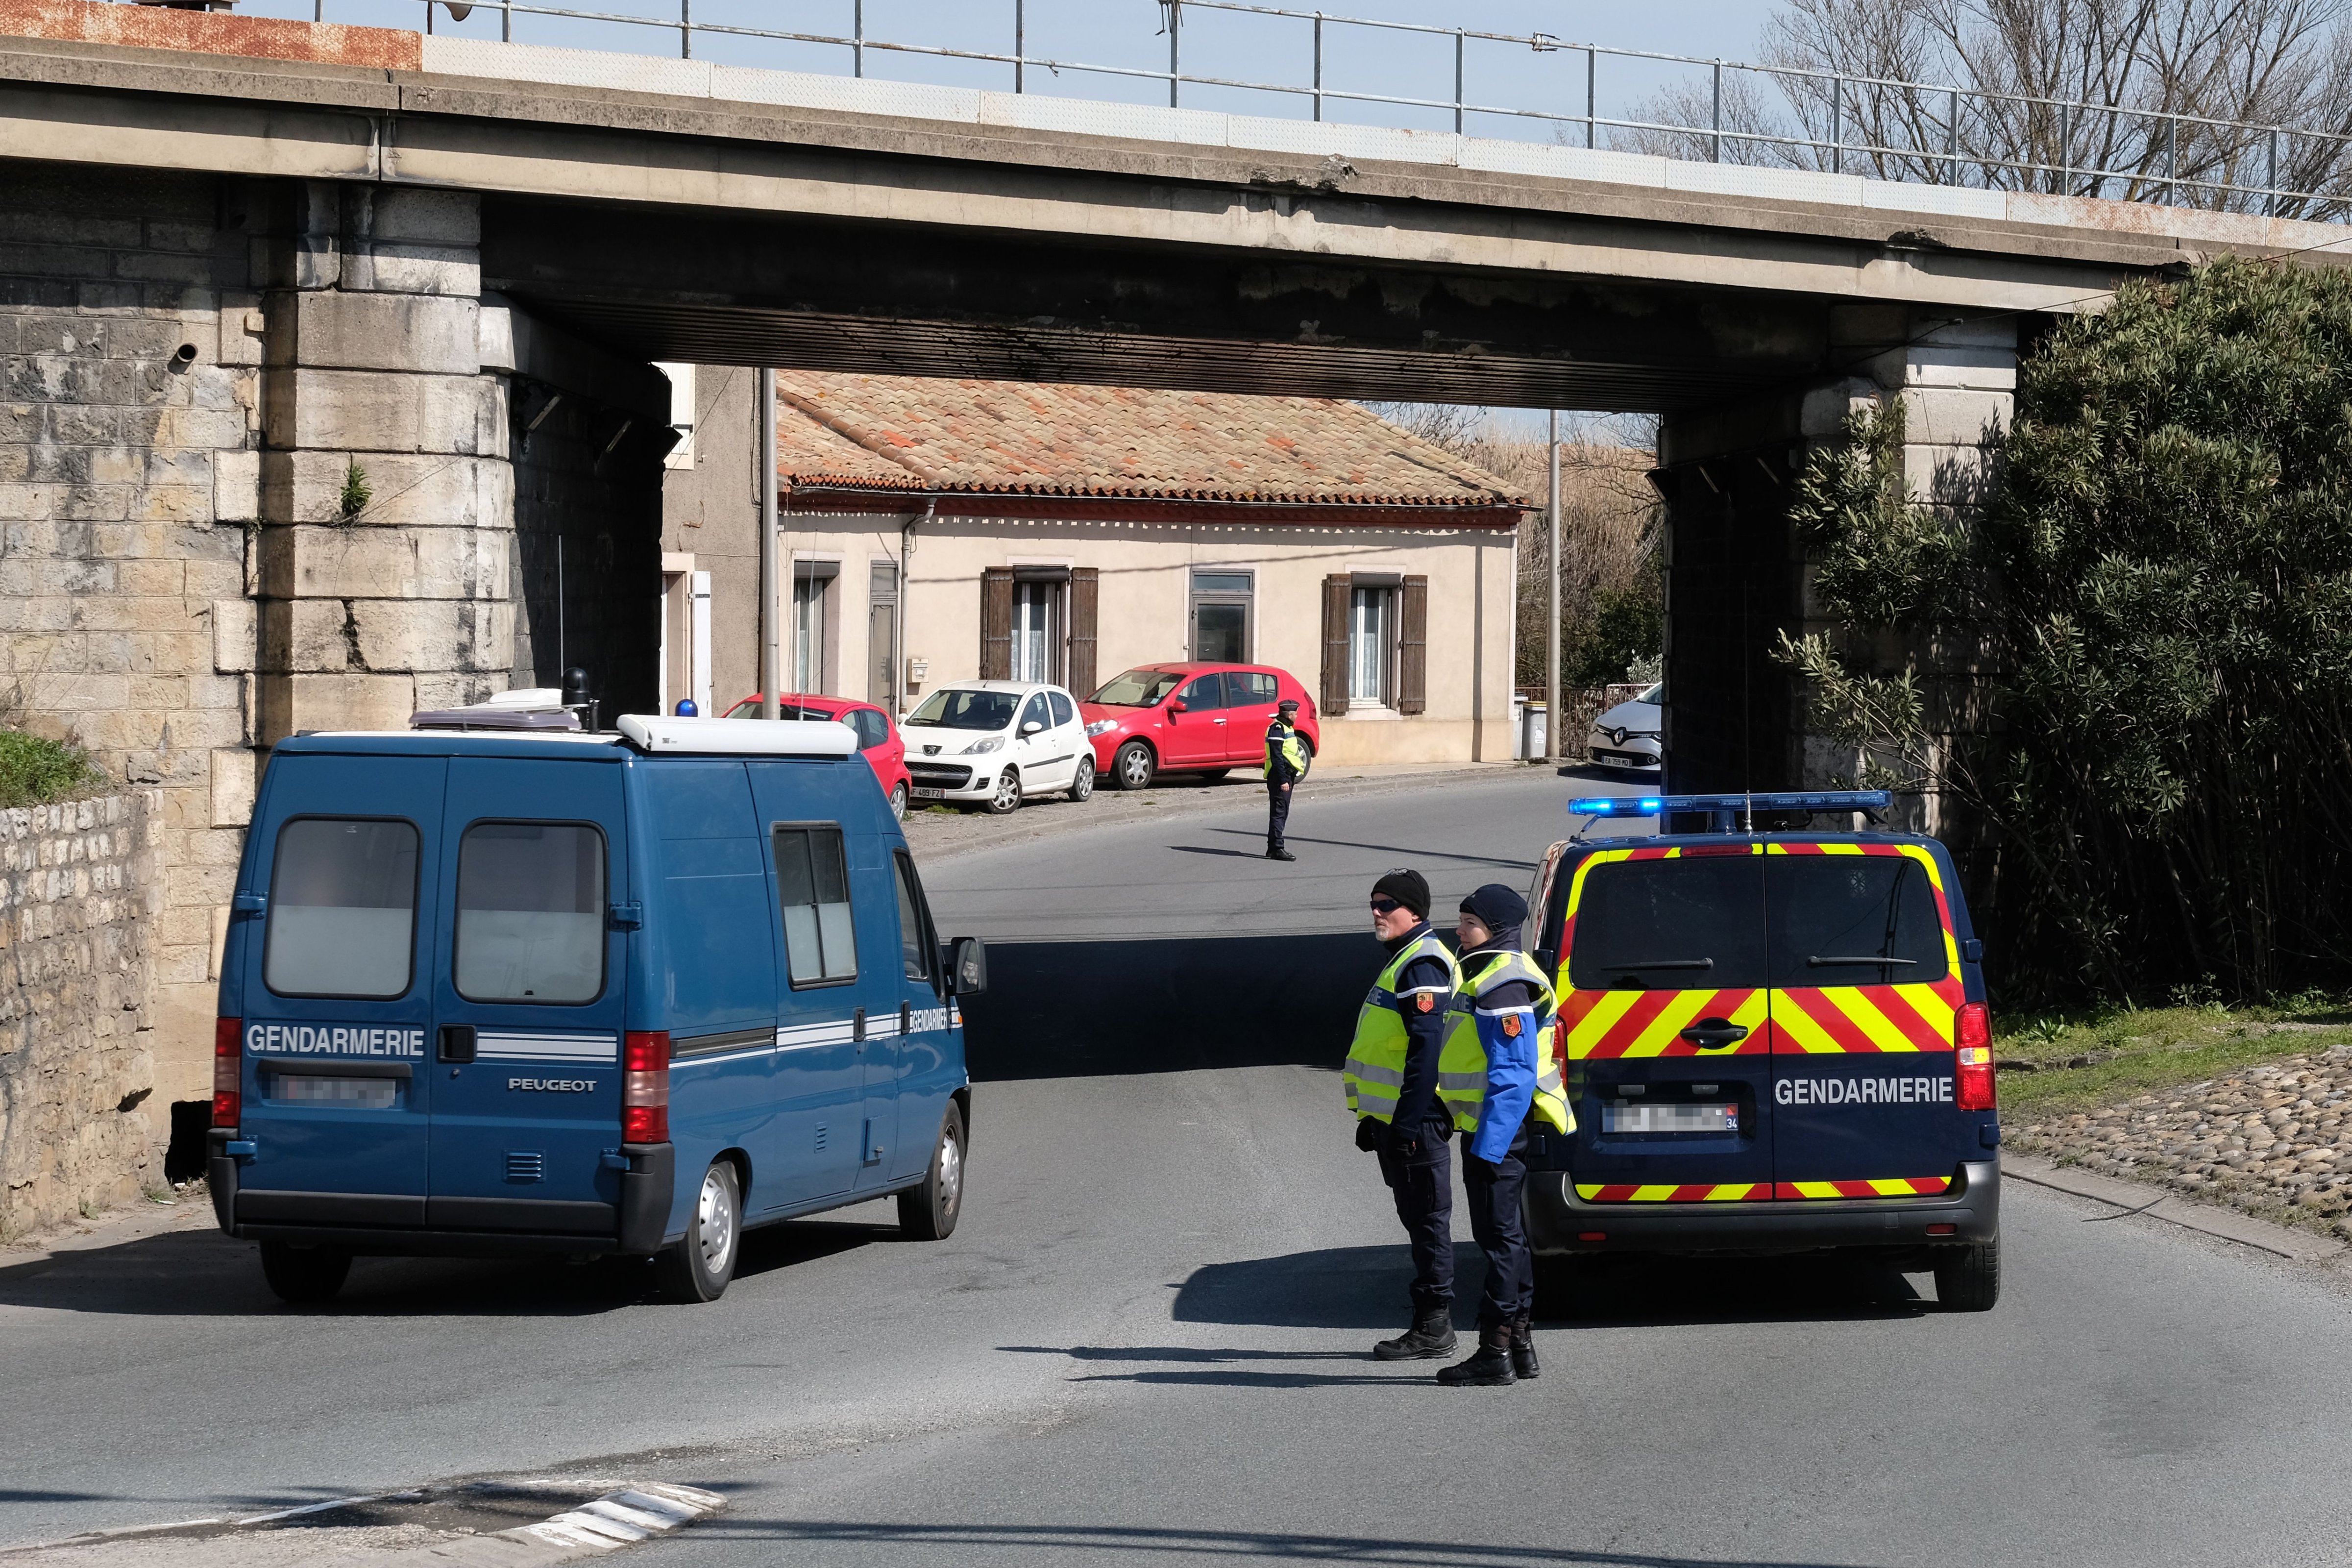 French gendarmes block an access to Trebes, where a man took hostages at a supermarket on March 23, 2018 in Trebes, southwest France. At least two people were killed after a gunman claiming allegiance to the Islamic State group opened fire and took hostages at a supermarket in southwest France. / AFP PHOTO / ERIC CABANIS (ERIC CABANIS&mdash;AFP/Getty Images)